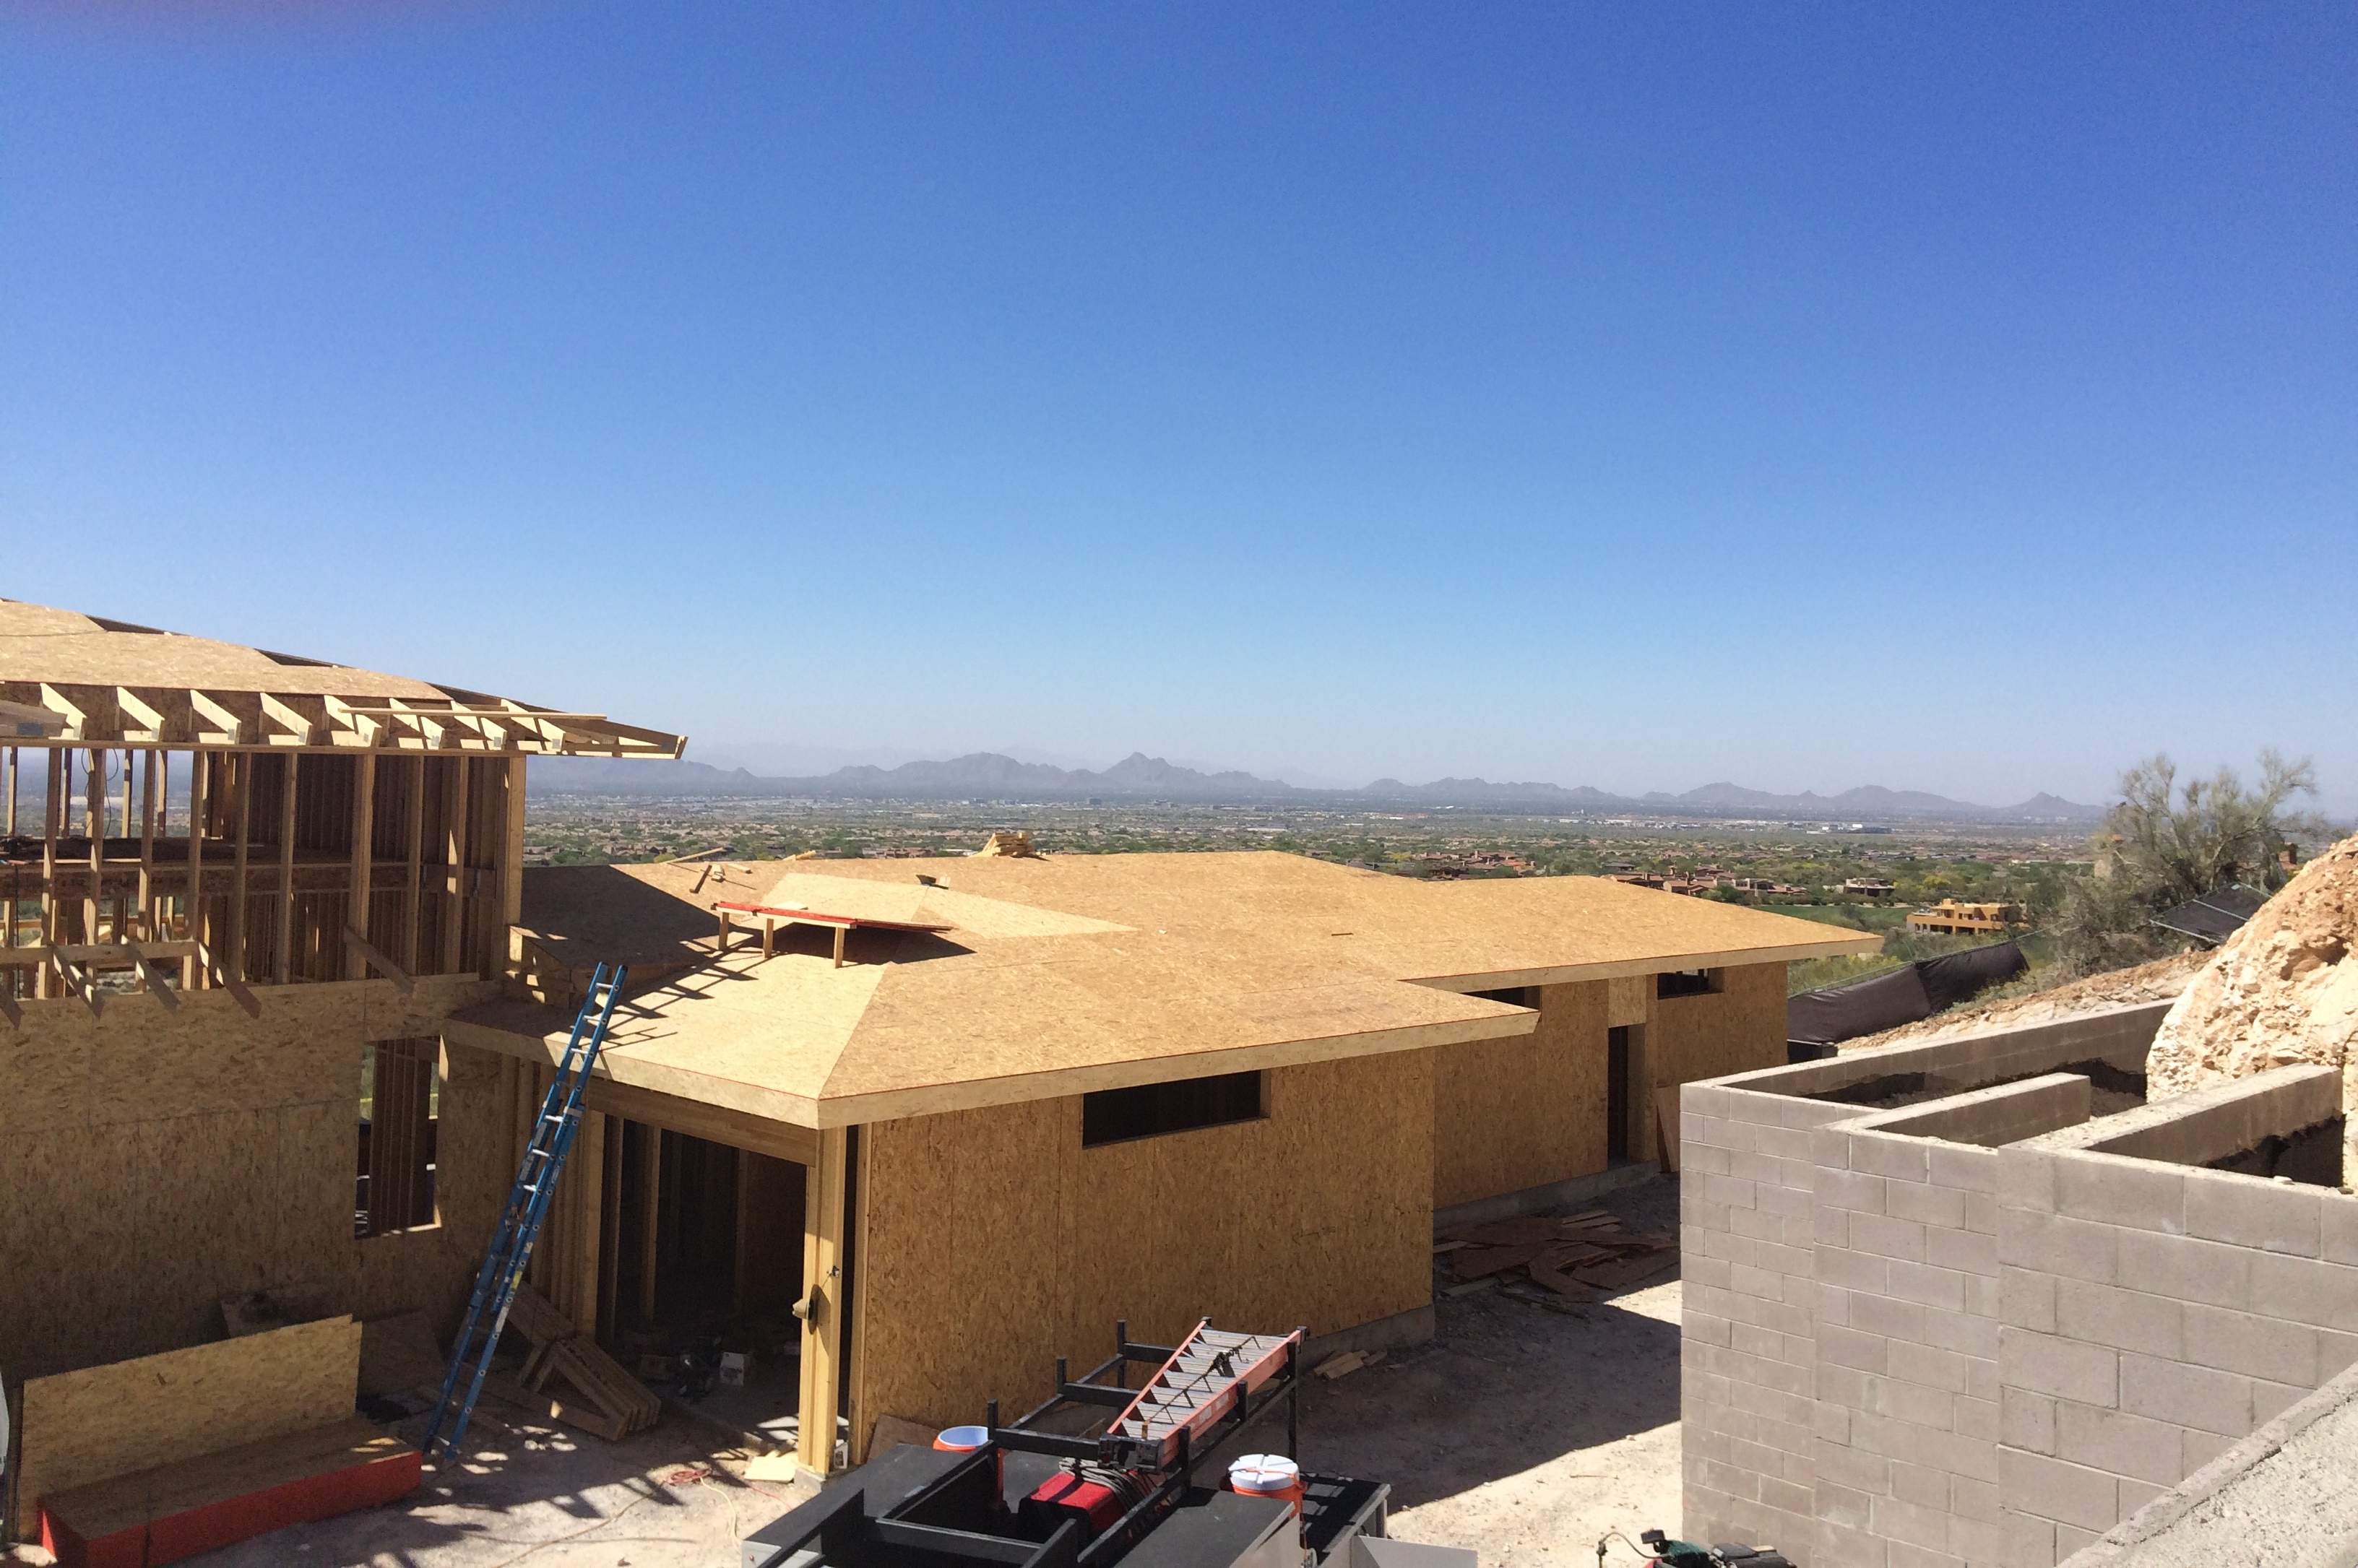 Atop a masonry retaining wall, we can see the vast views over the framed garage.